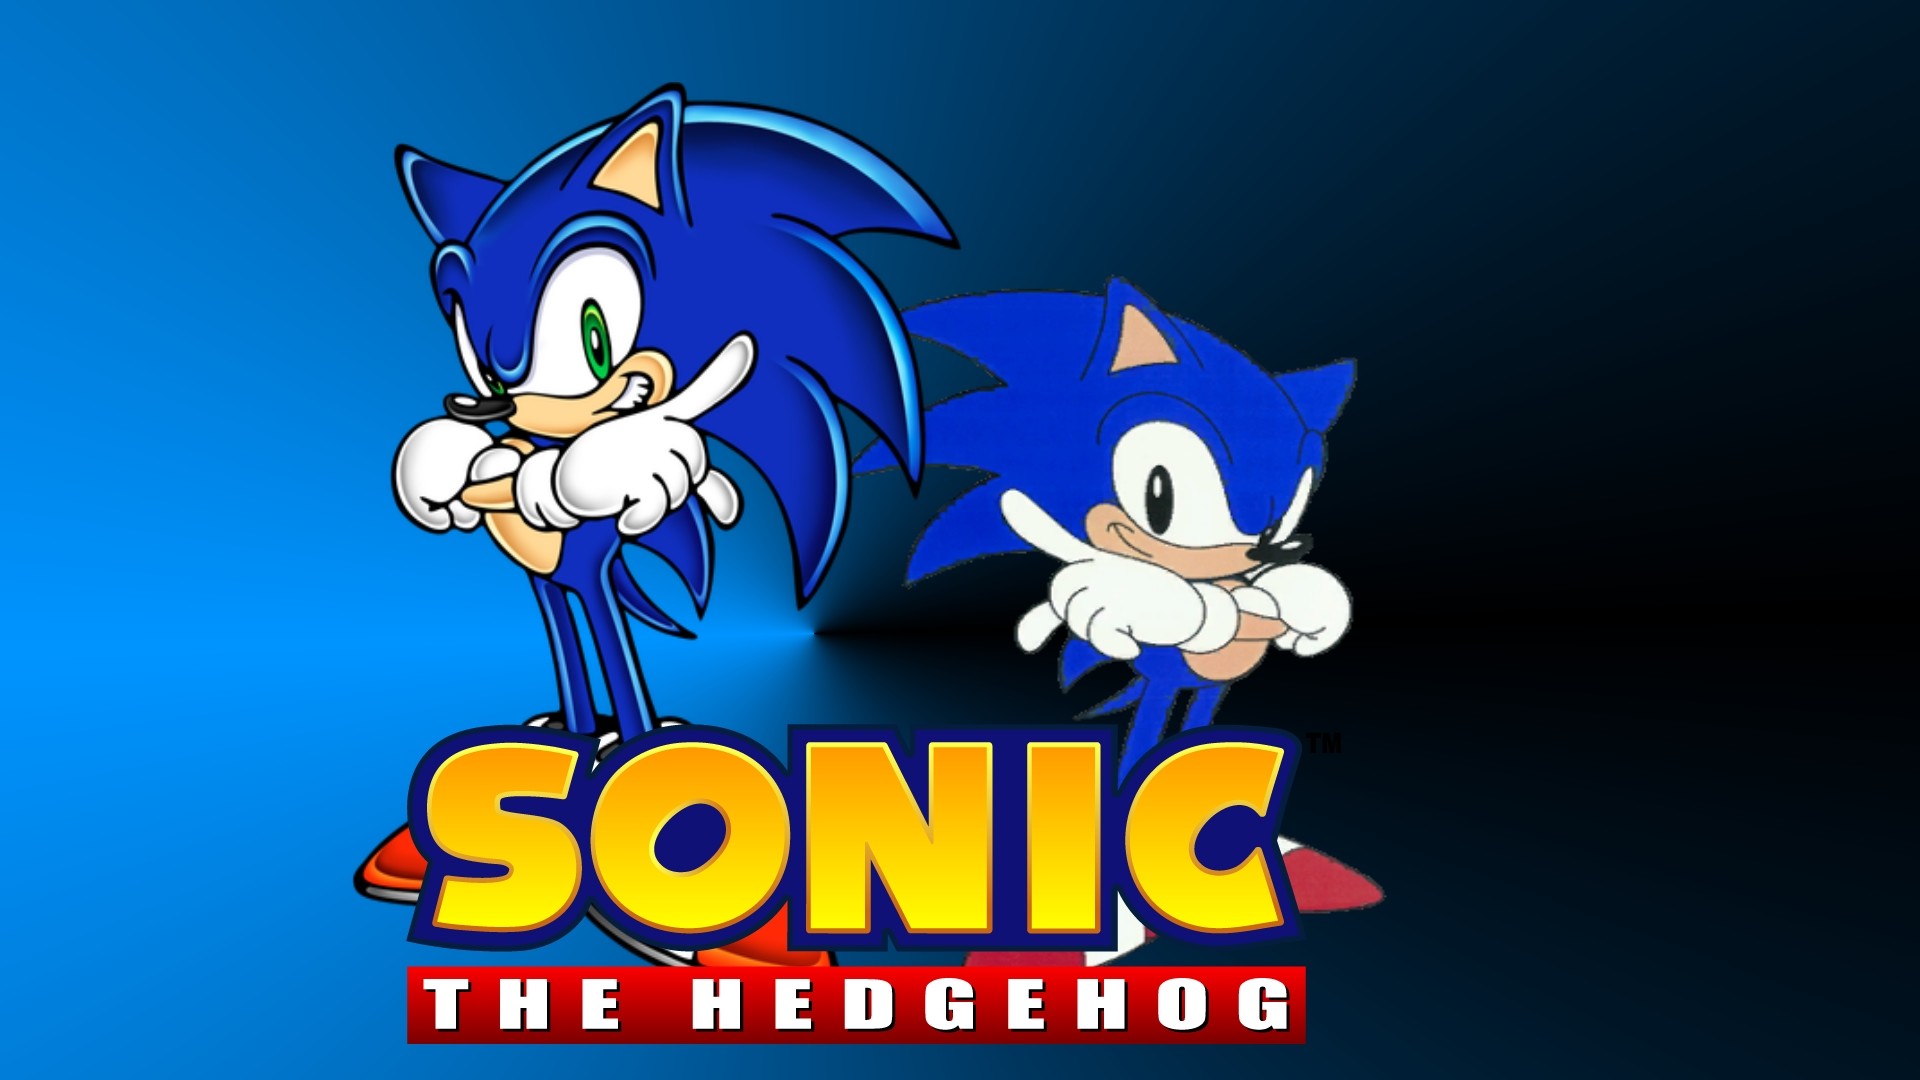 1920x1080 ... sonic wallpapers hd image - Simply Wallpaper - Just choose and .